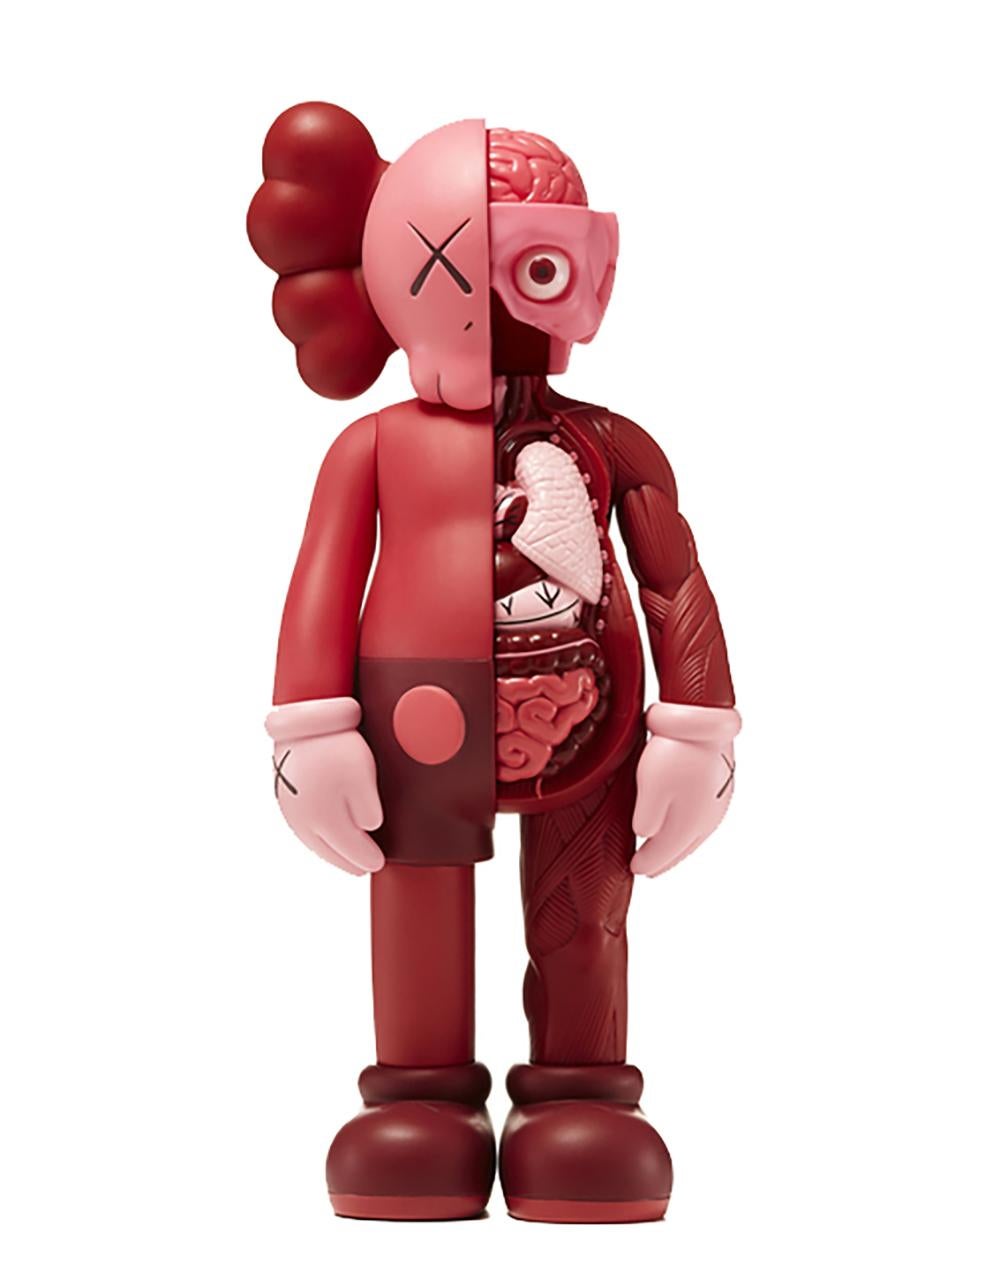 KAWS - Set of 2 Companion Blush (Flayed) and Companion Blush- Painted Cast Vinyl For Sale 2